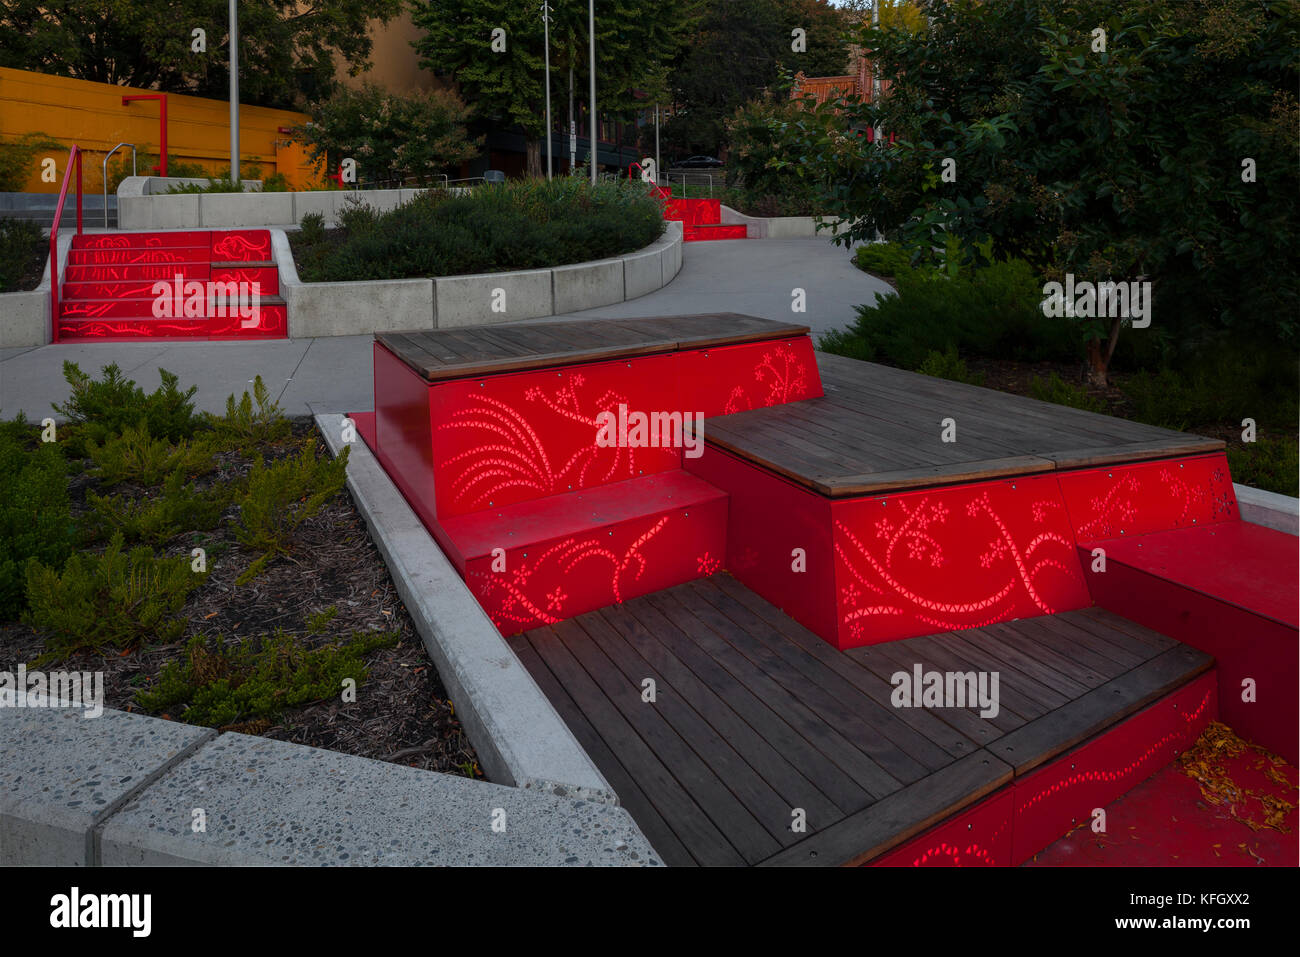 WA14158-00...WASHINGTON - Steps with chinese zodiac symbols light the walkways at Hing Hay Park in Seattles International District. Stock Photo